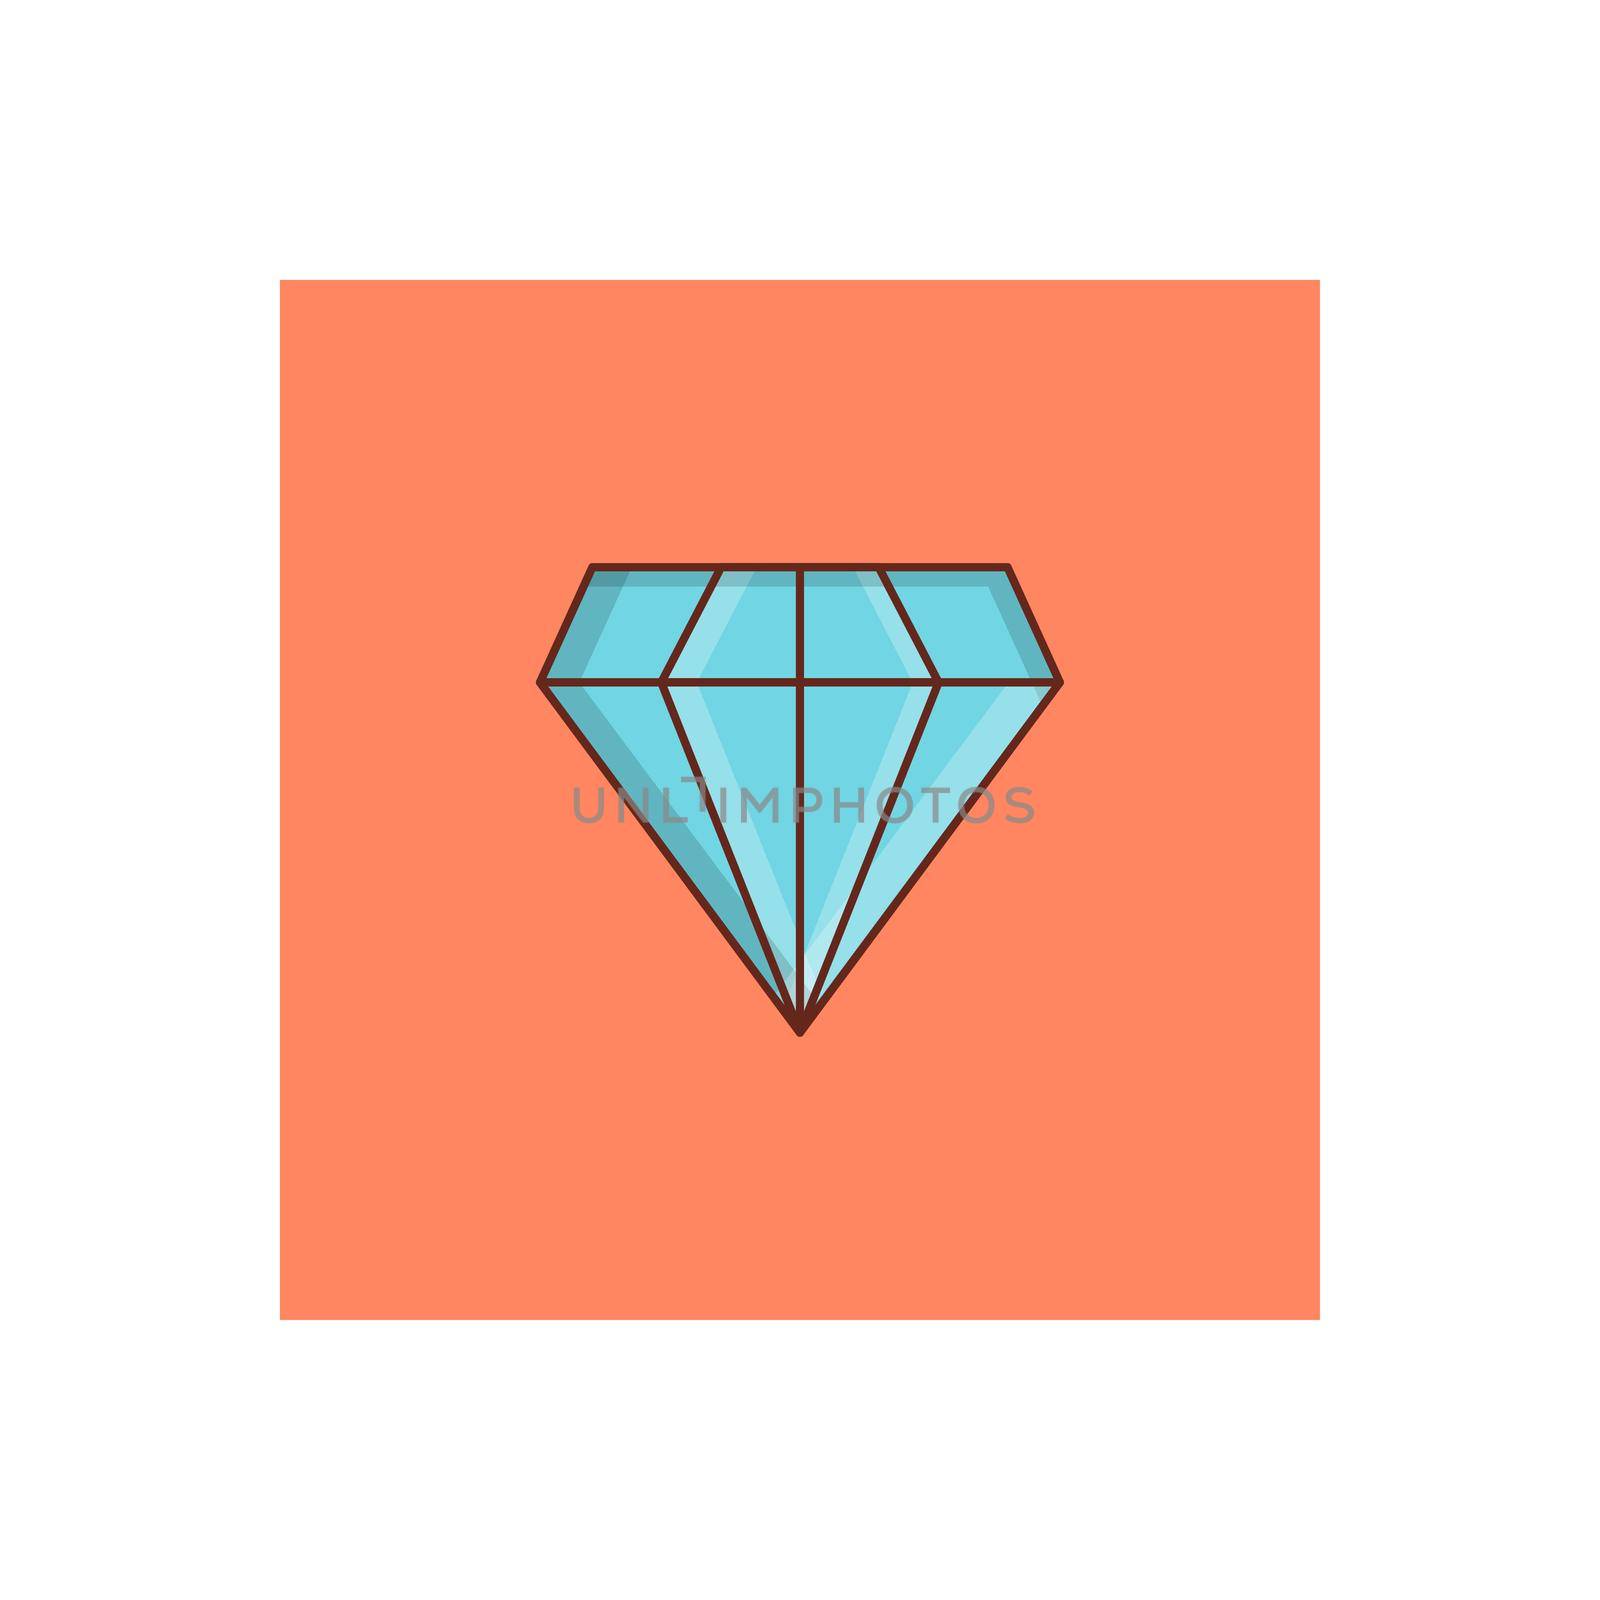 diamond Vector illustration on a transparent background. Premium quality symbols.Vector line flat color icon for concept and graphic design.